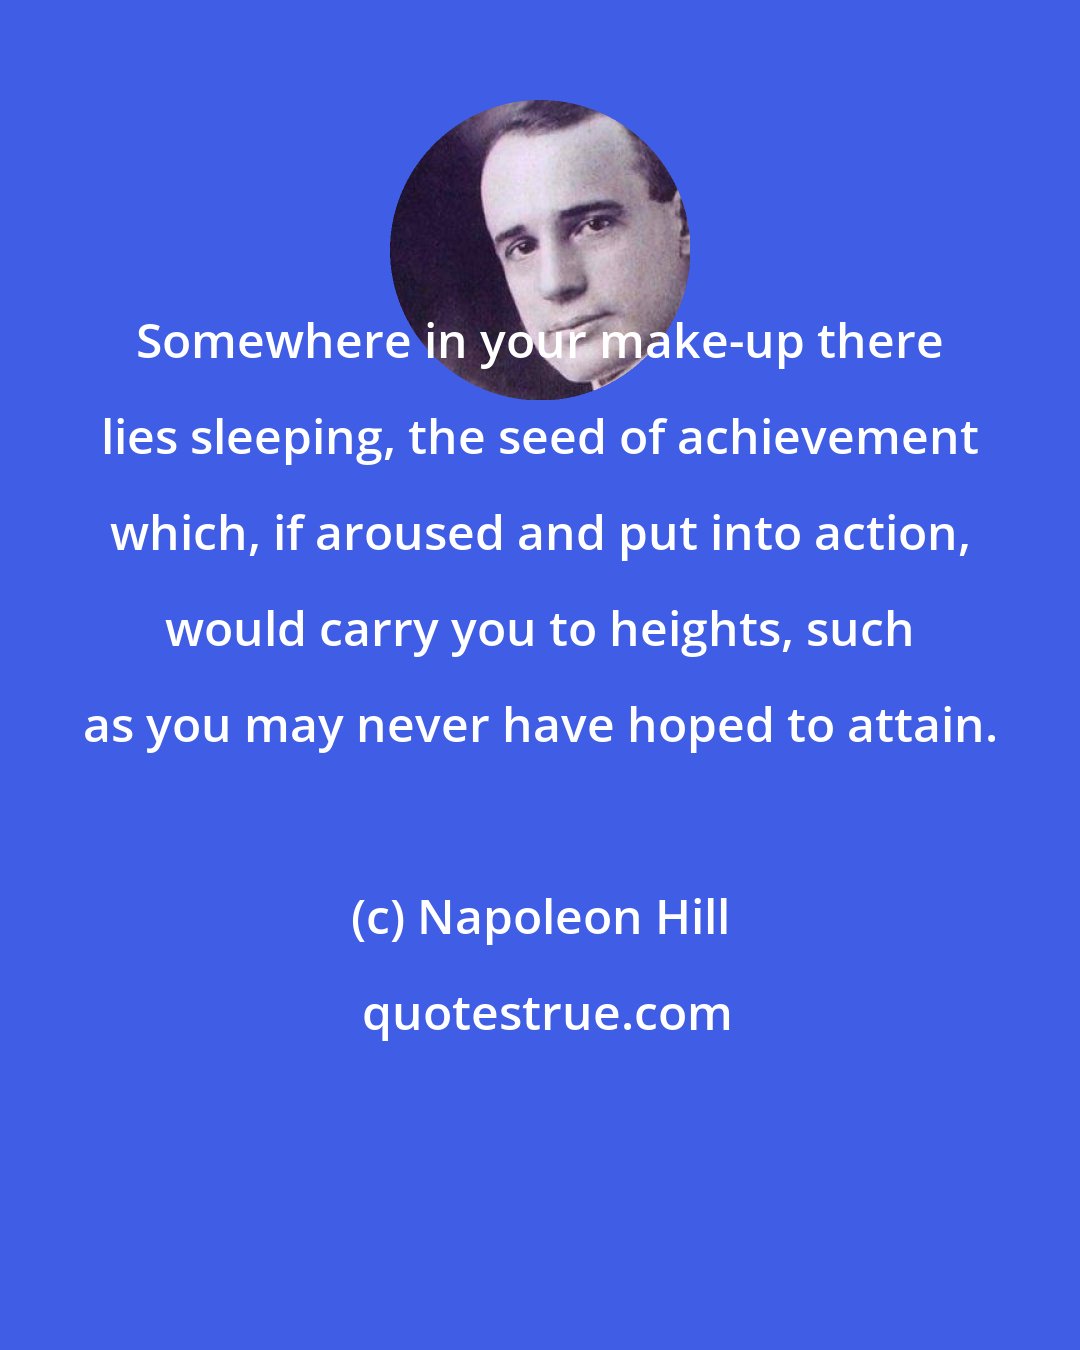 Napoleon Hill: Somewhere in your make-up there lies sleeping, the seed of achievement which, if aroused and put into action, would carry you to heights, such as you may never have hoped to attain.